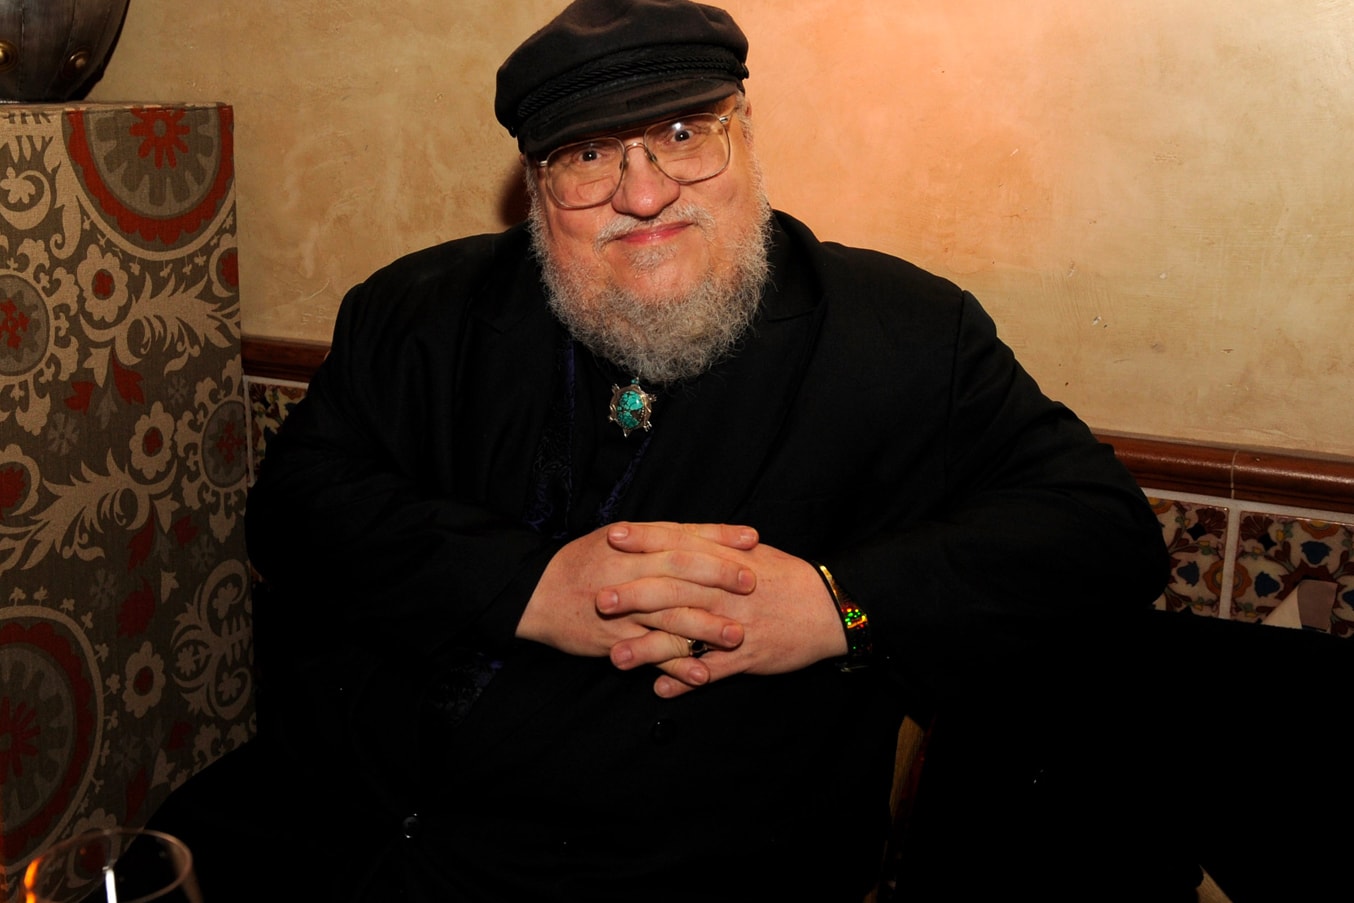 HBO developing game of thrones Prequel Tales of Dunk and Egg Report george r r martin a song of ice and fire